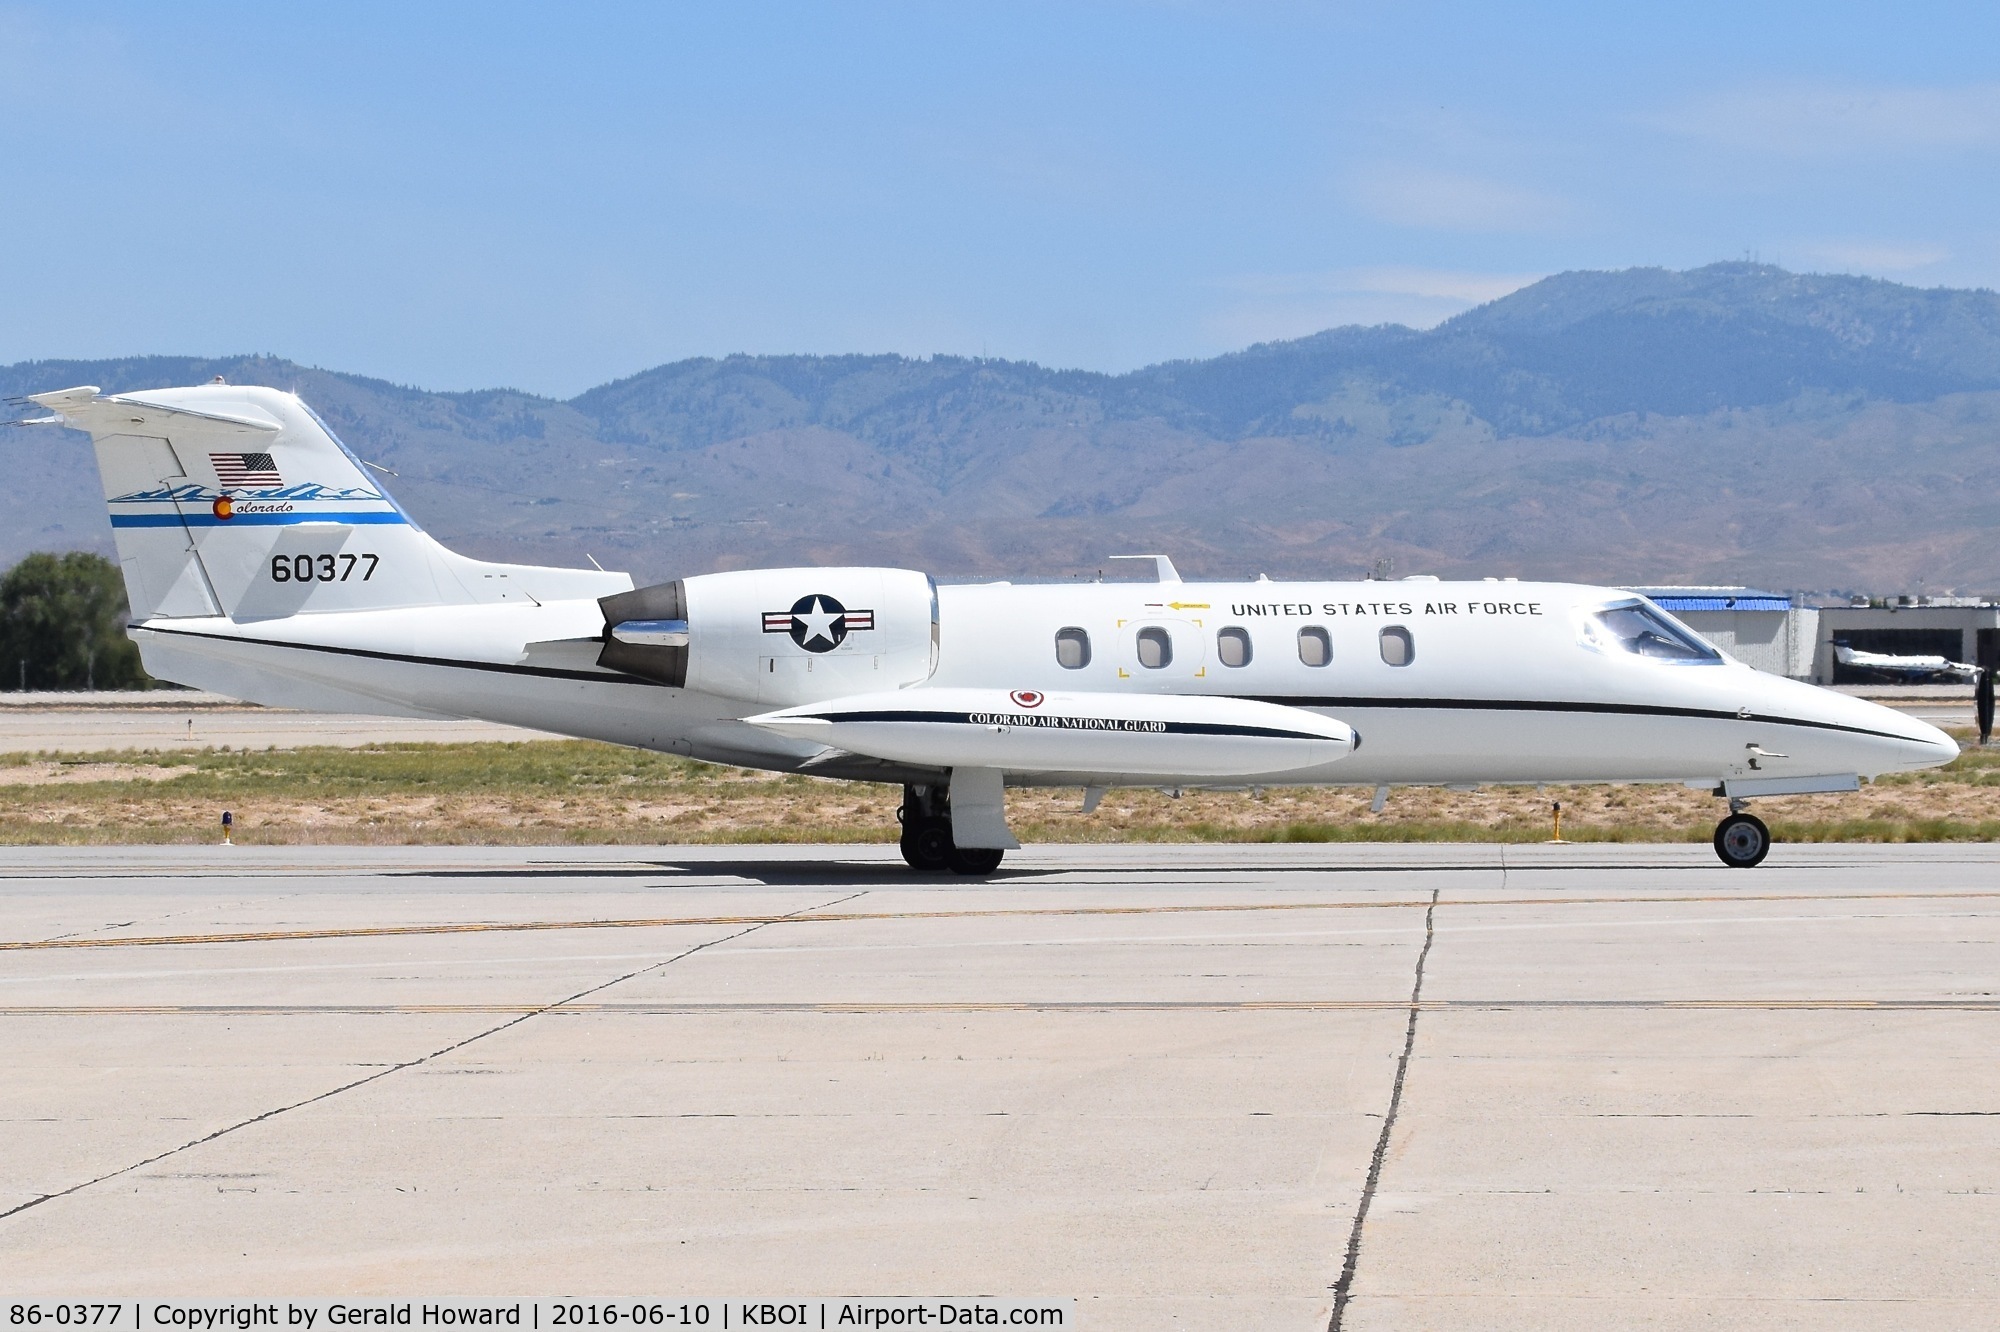 86-0377, 1985 Gates Learjet C-21A C/N 35A-629, Taxiing on Bravo. Colorado ANG.